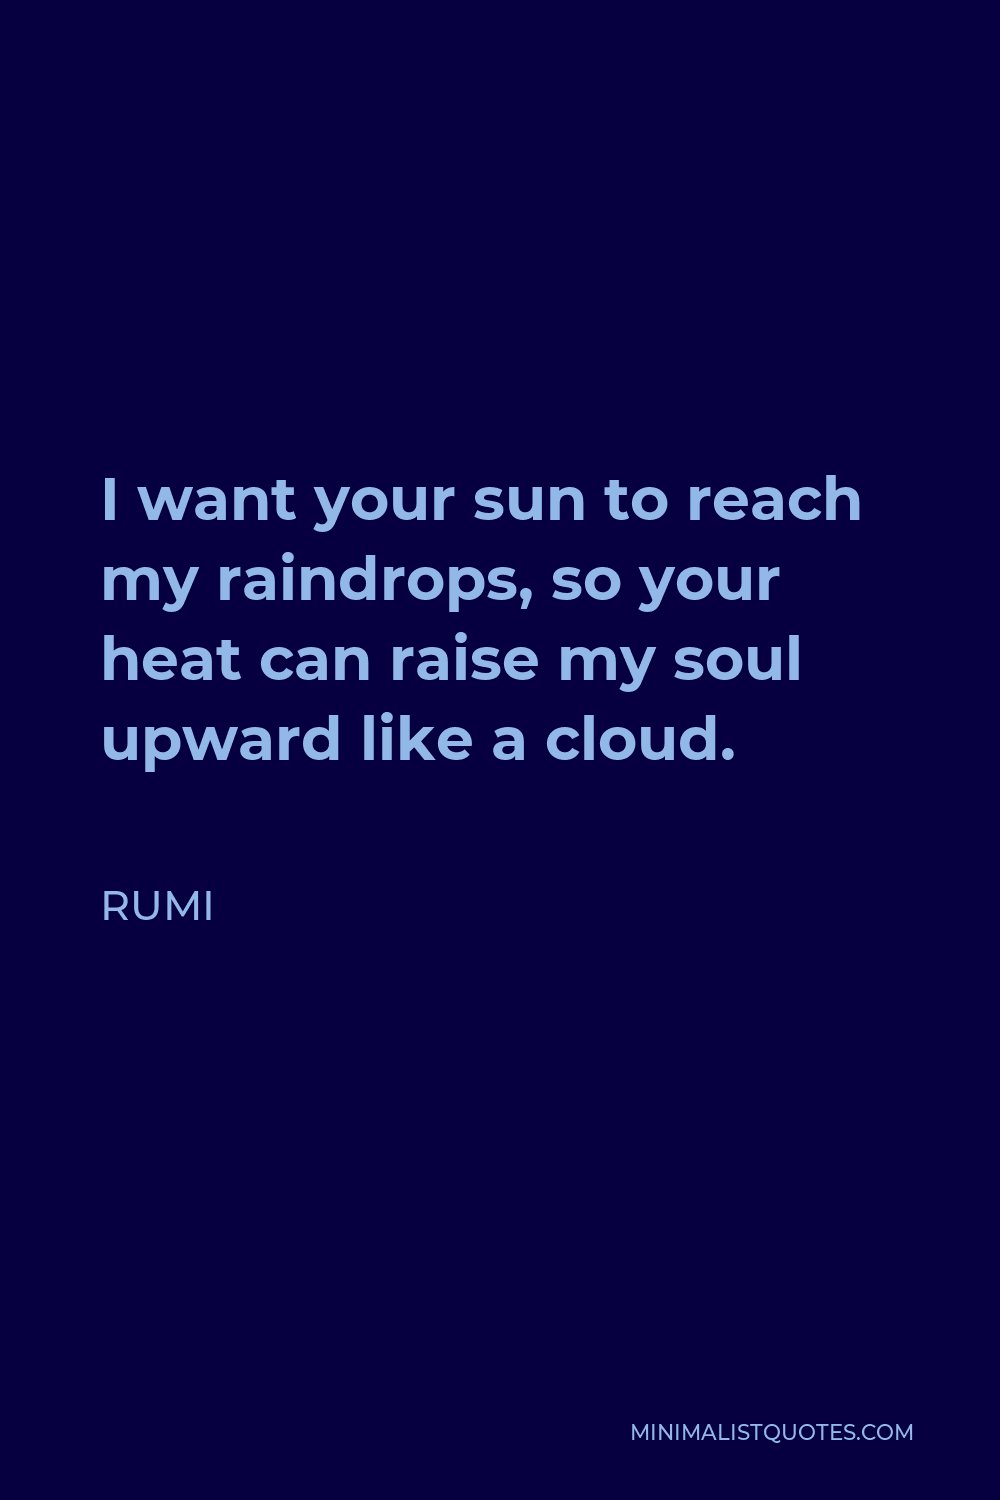 Rumi Quote - I want your sun to reach my raindrops, so your heat can raise my soul upward like a cloud.